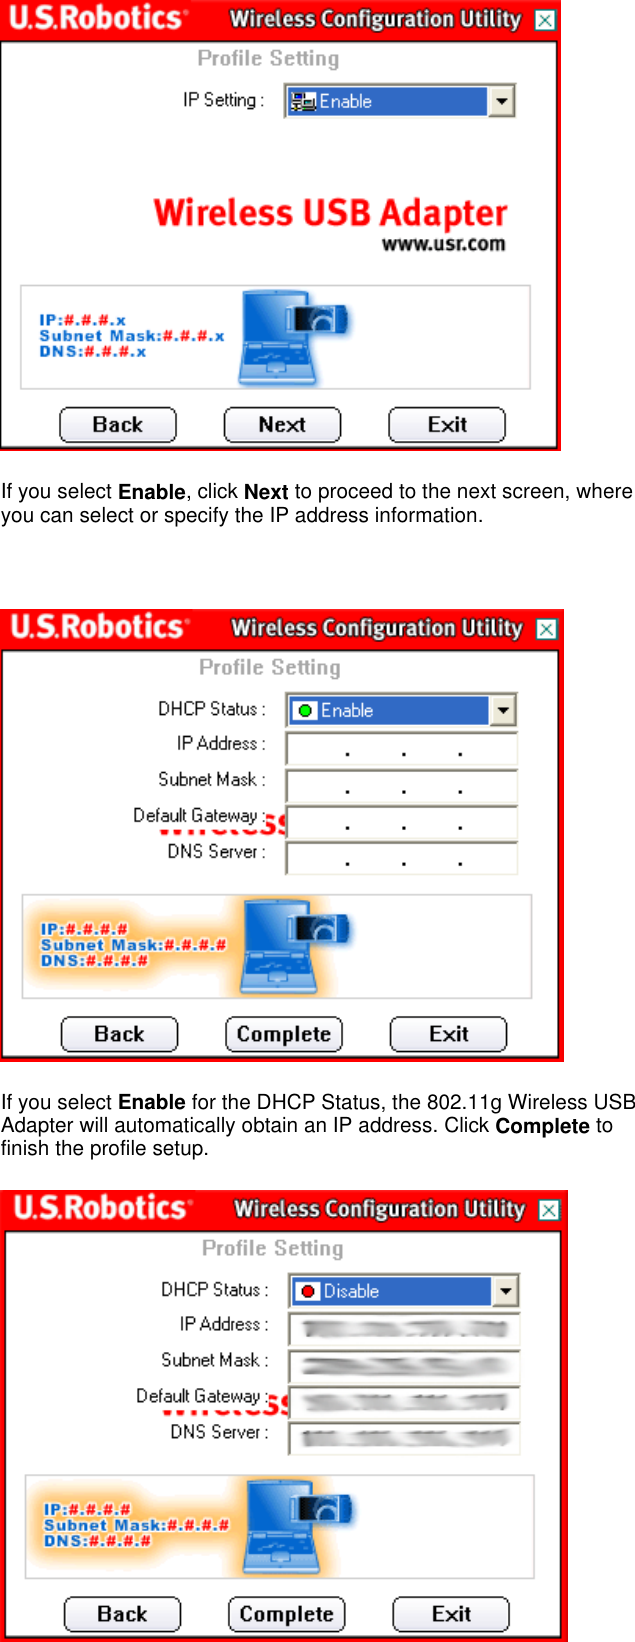  If you select Enable, click Next to proceed to the next screen, where you can select or specify the IP address information.    If you select Enable for the DHCP Status, the 802.11g Wireless USB Adapter will automatically obtain an IP address. Click Complete to finish the profile setup.  